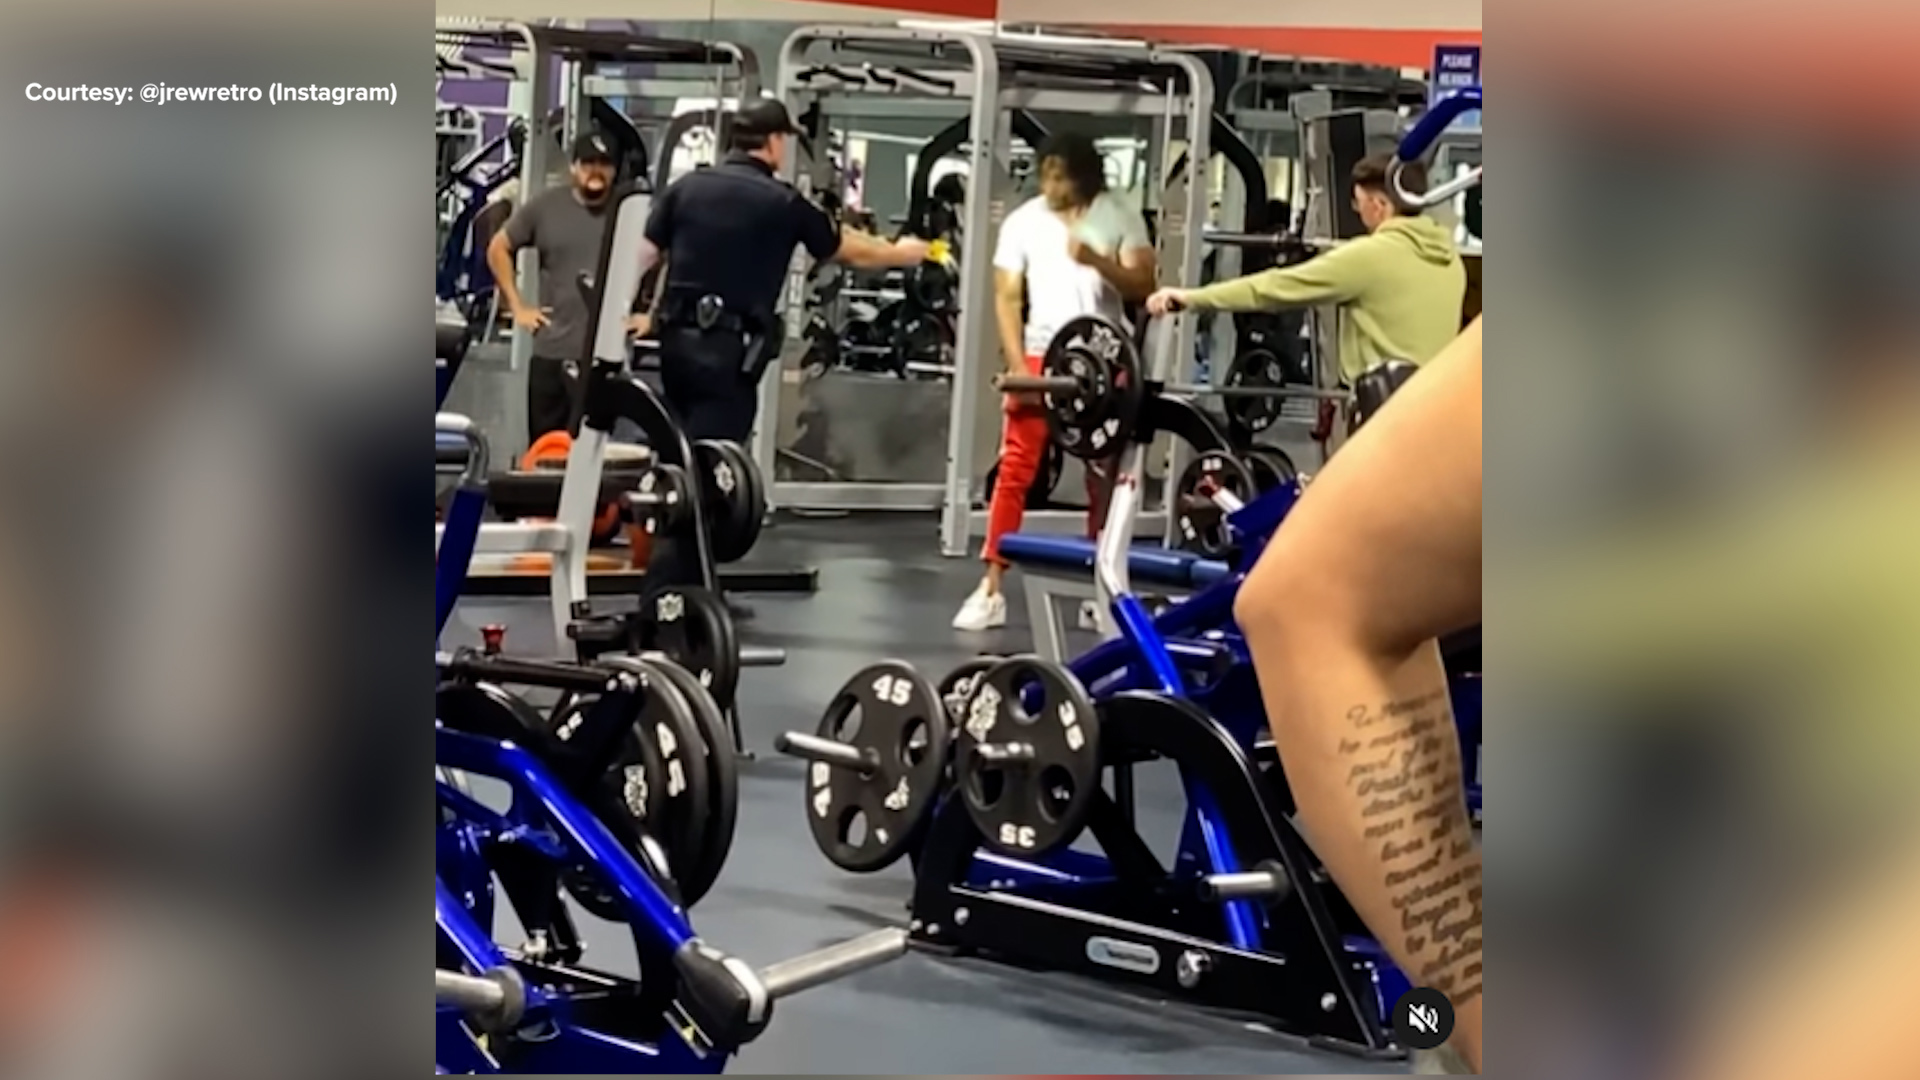 Cell phone video shows a Texas man being tased by police at the gym after he allegedly assaulted another gym member the day before.